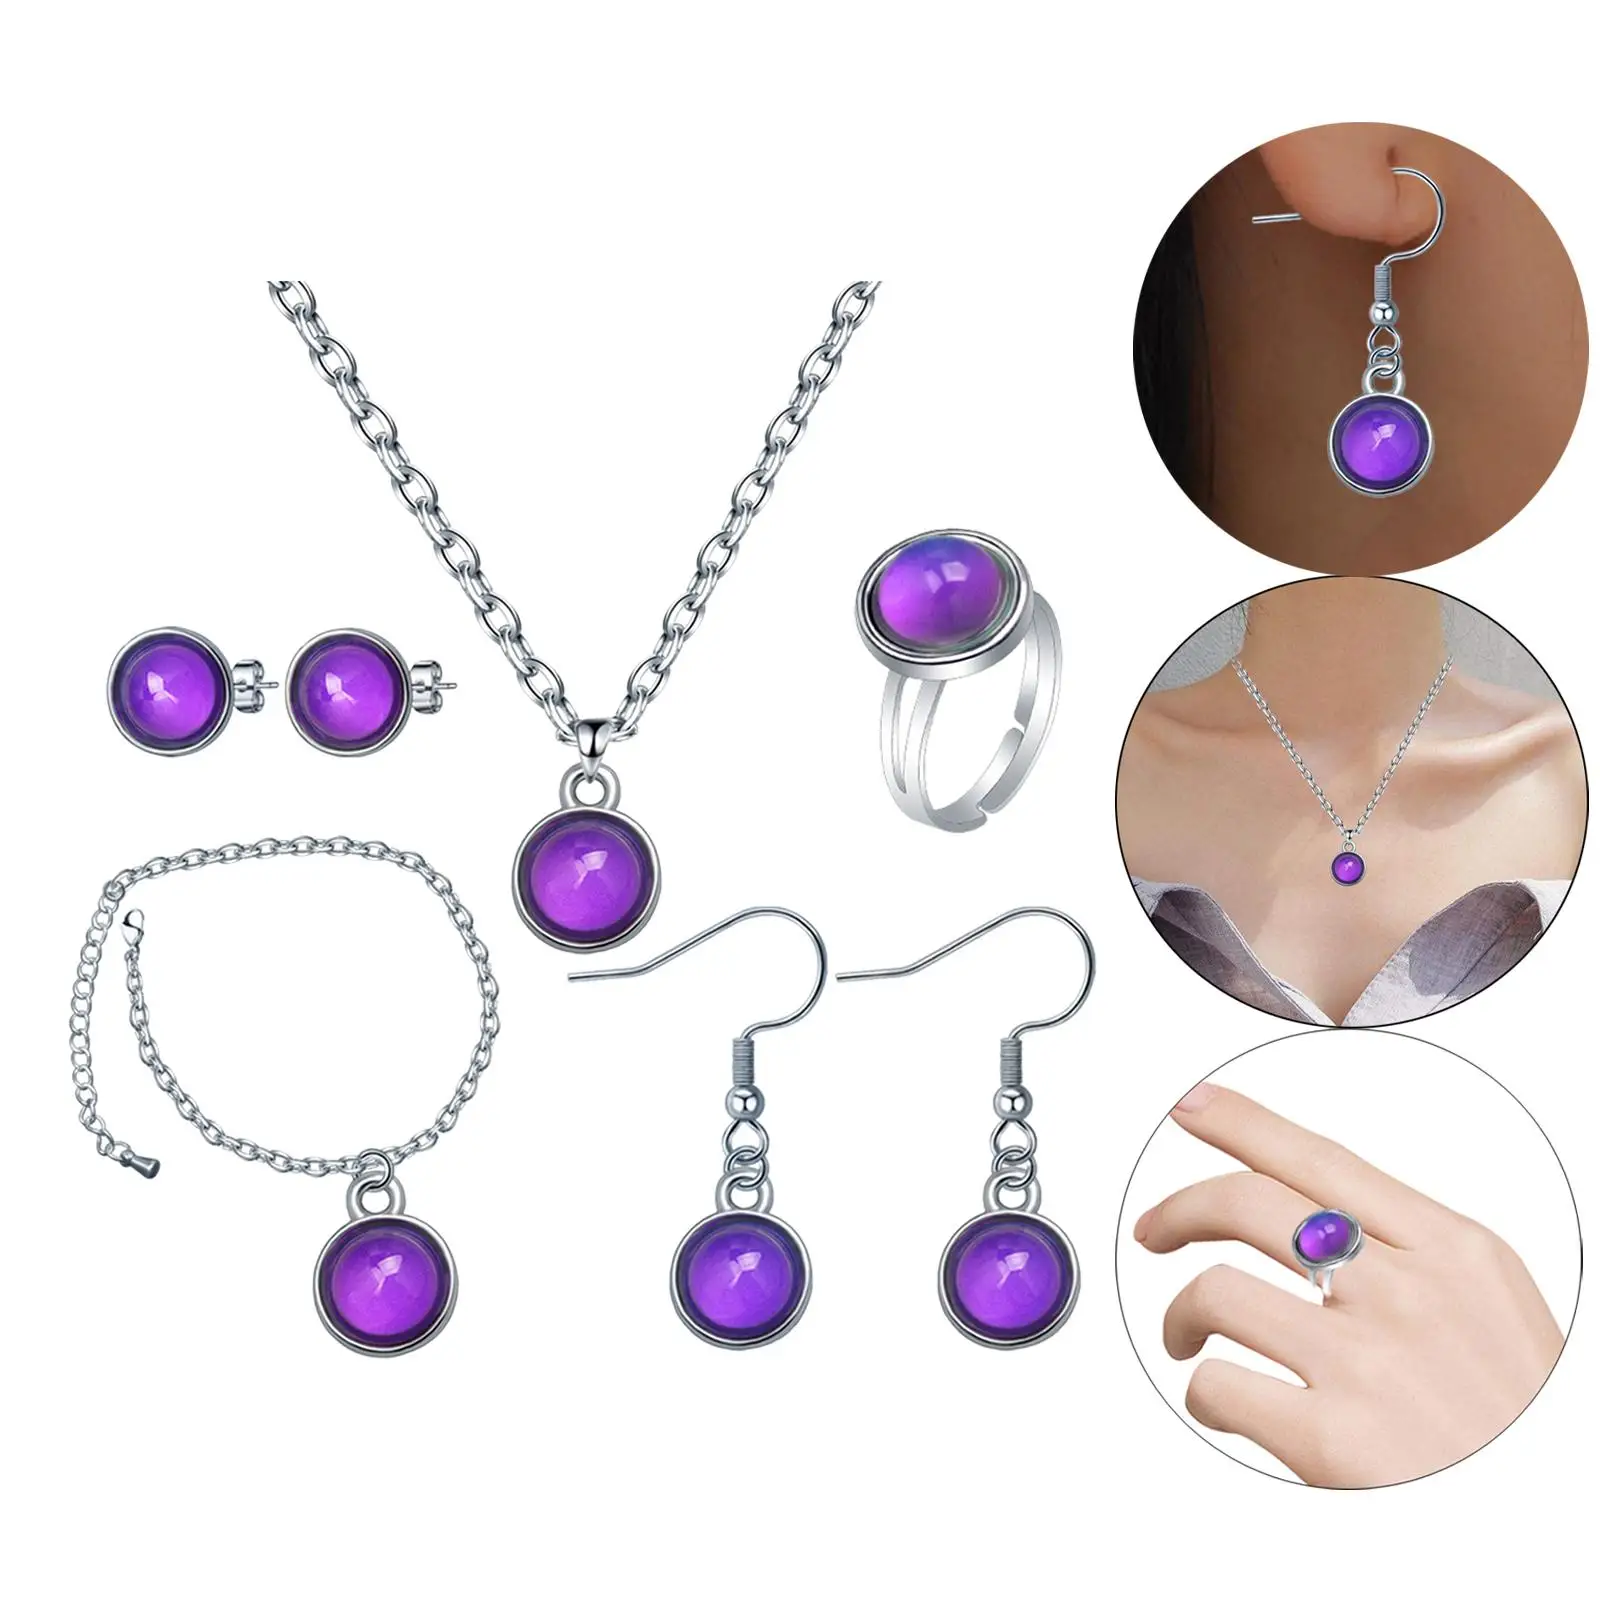 Mood Necklace Jewelry Set Fashion Temperature Sensing Mood Jewelry for Girls Women Wife Girlfriend Daughter Mom Valentine`s Day